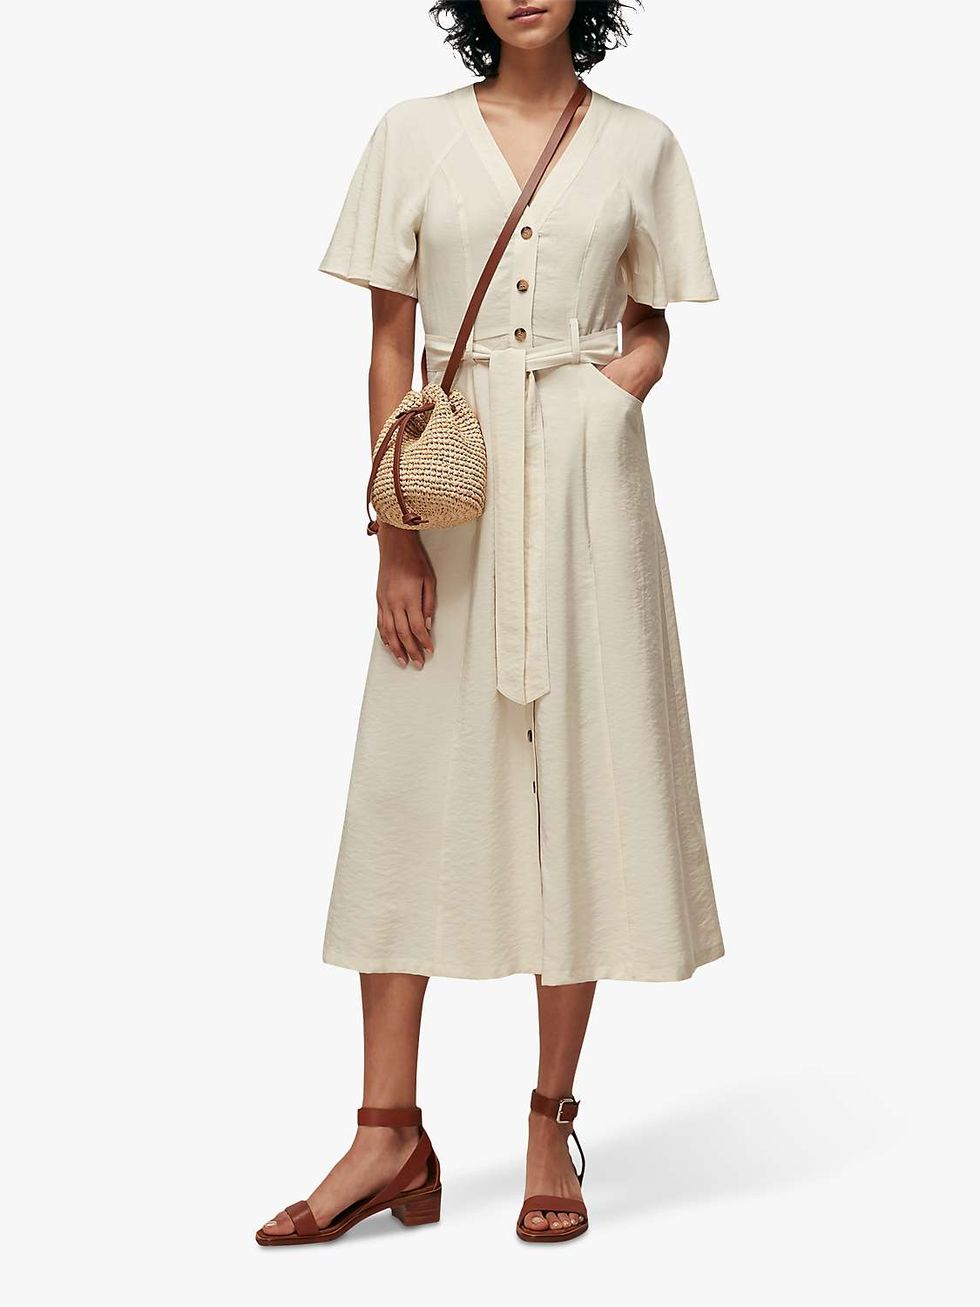 10 white shirt dresses to keep you cool in a heatwave